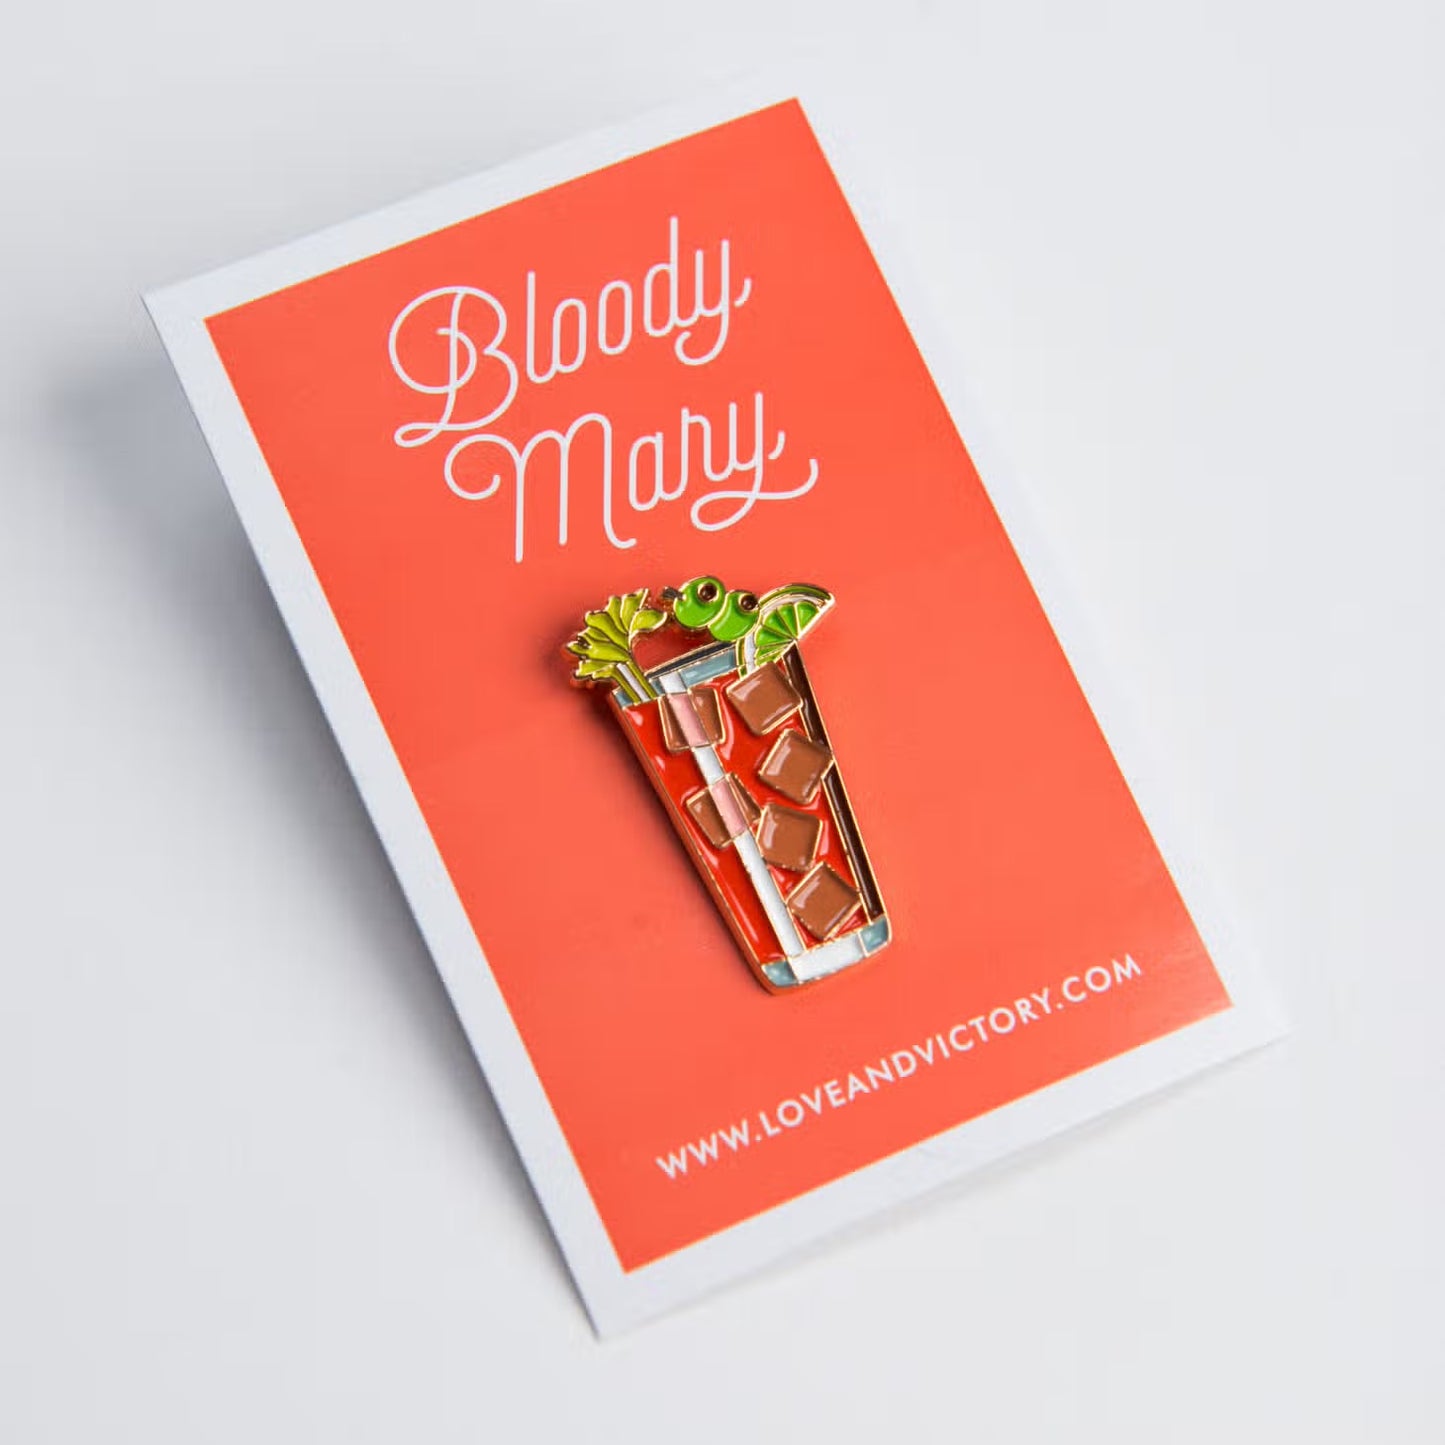 Bloody Mary lapel pin on red card backing.